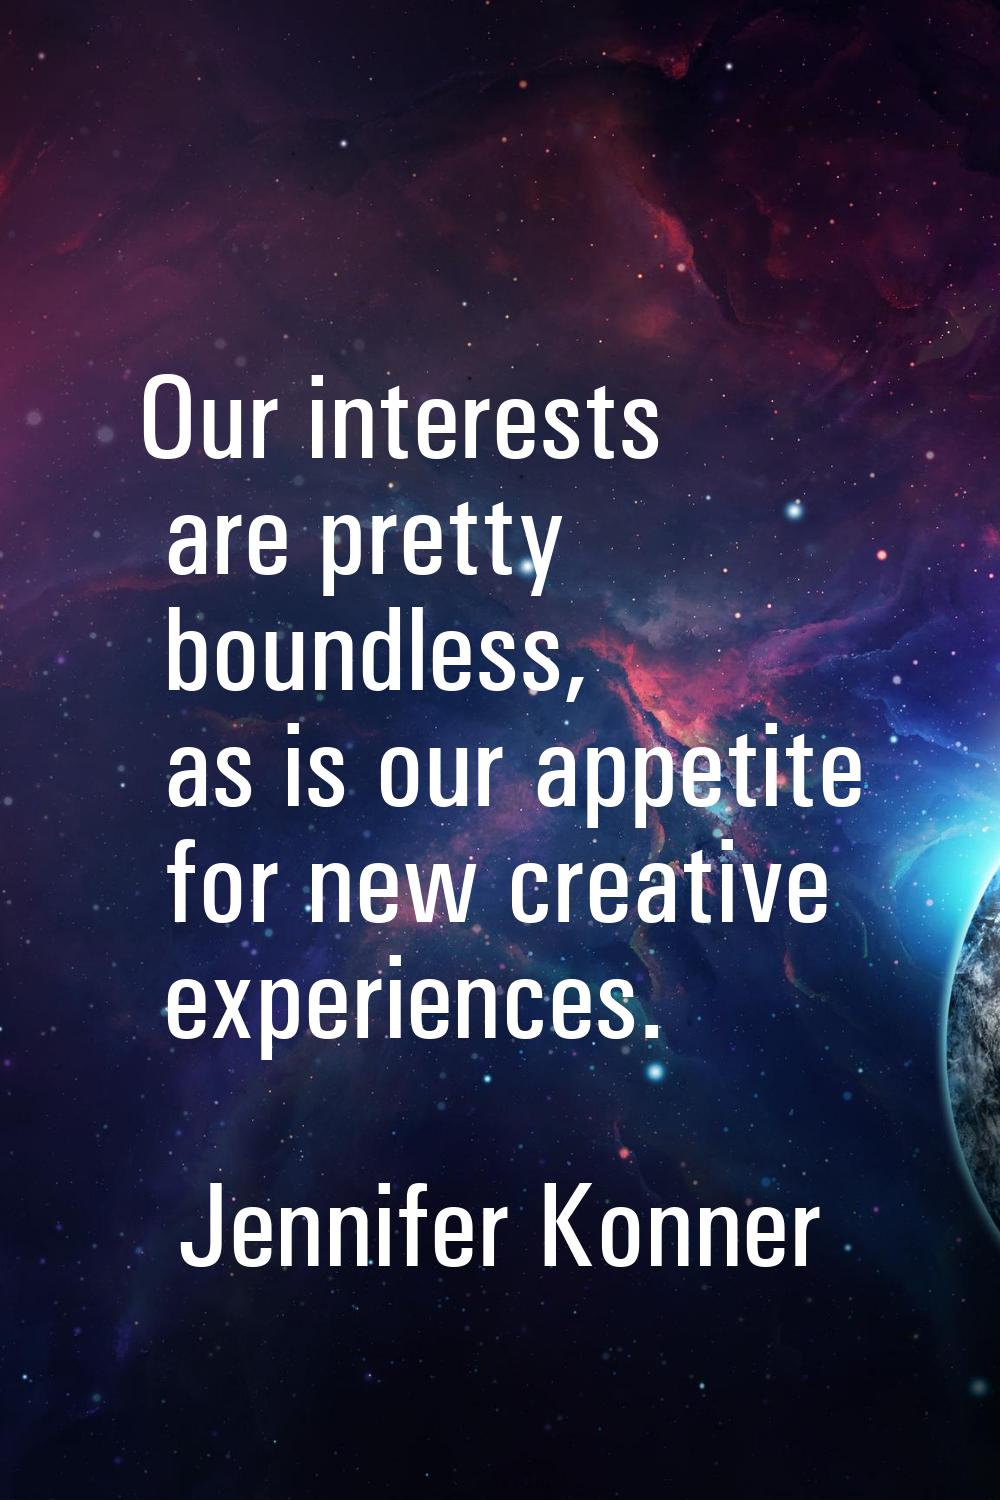 Our interests are pretty boundless, as is our appetite for new creative experiences.